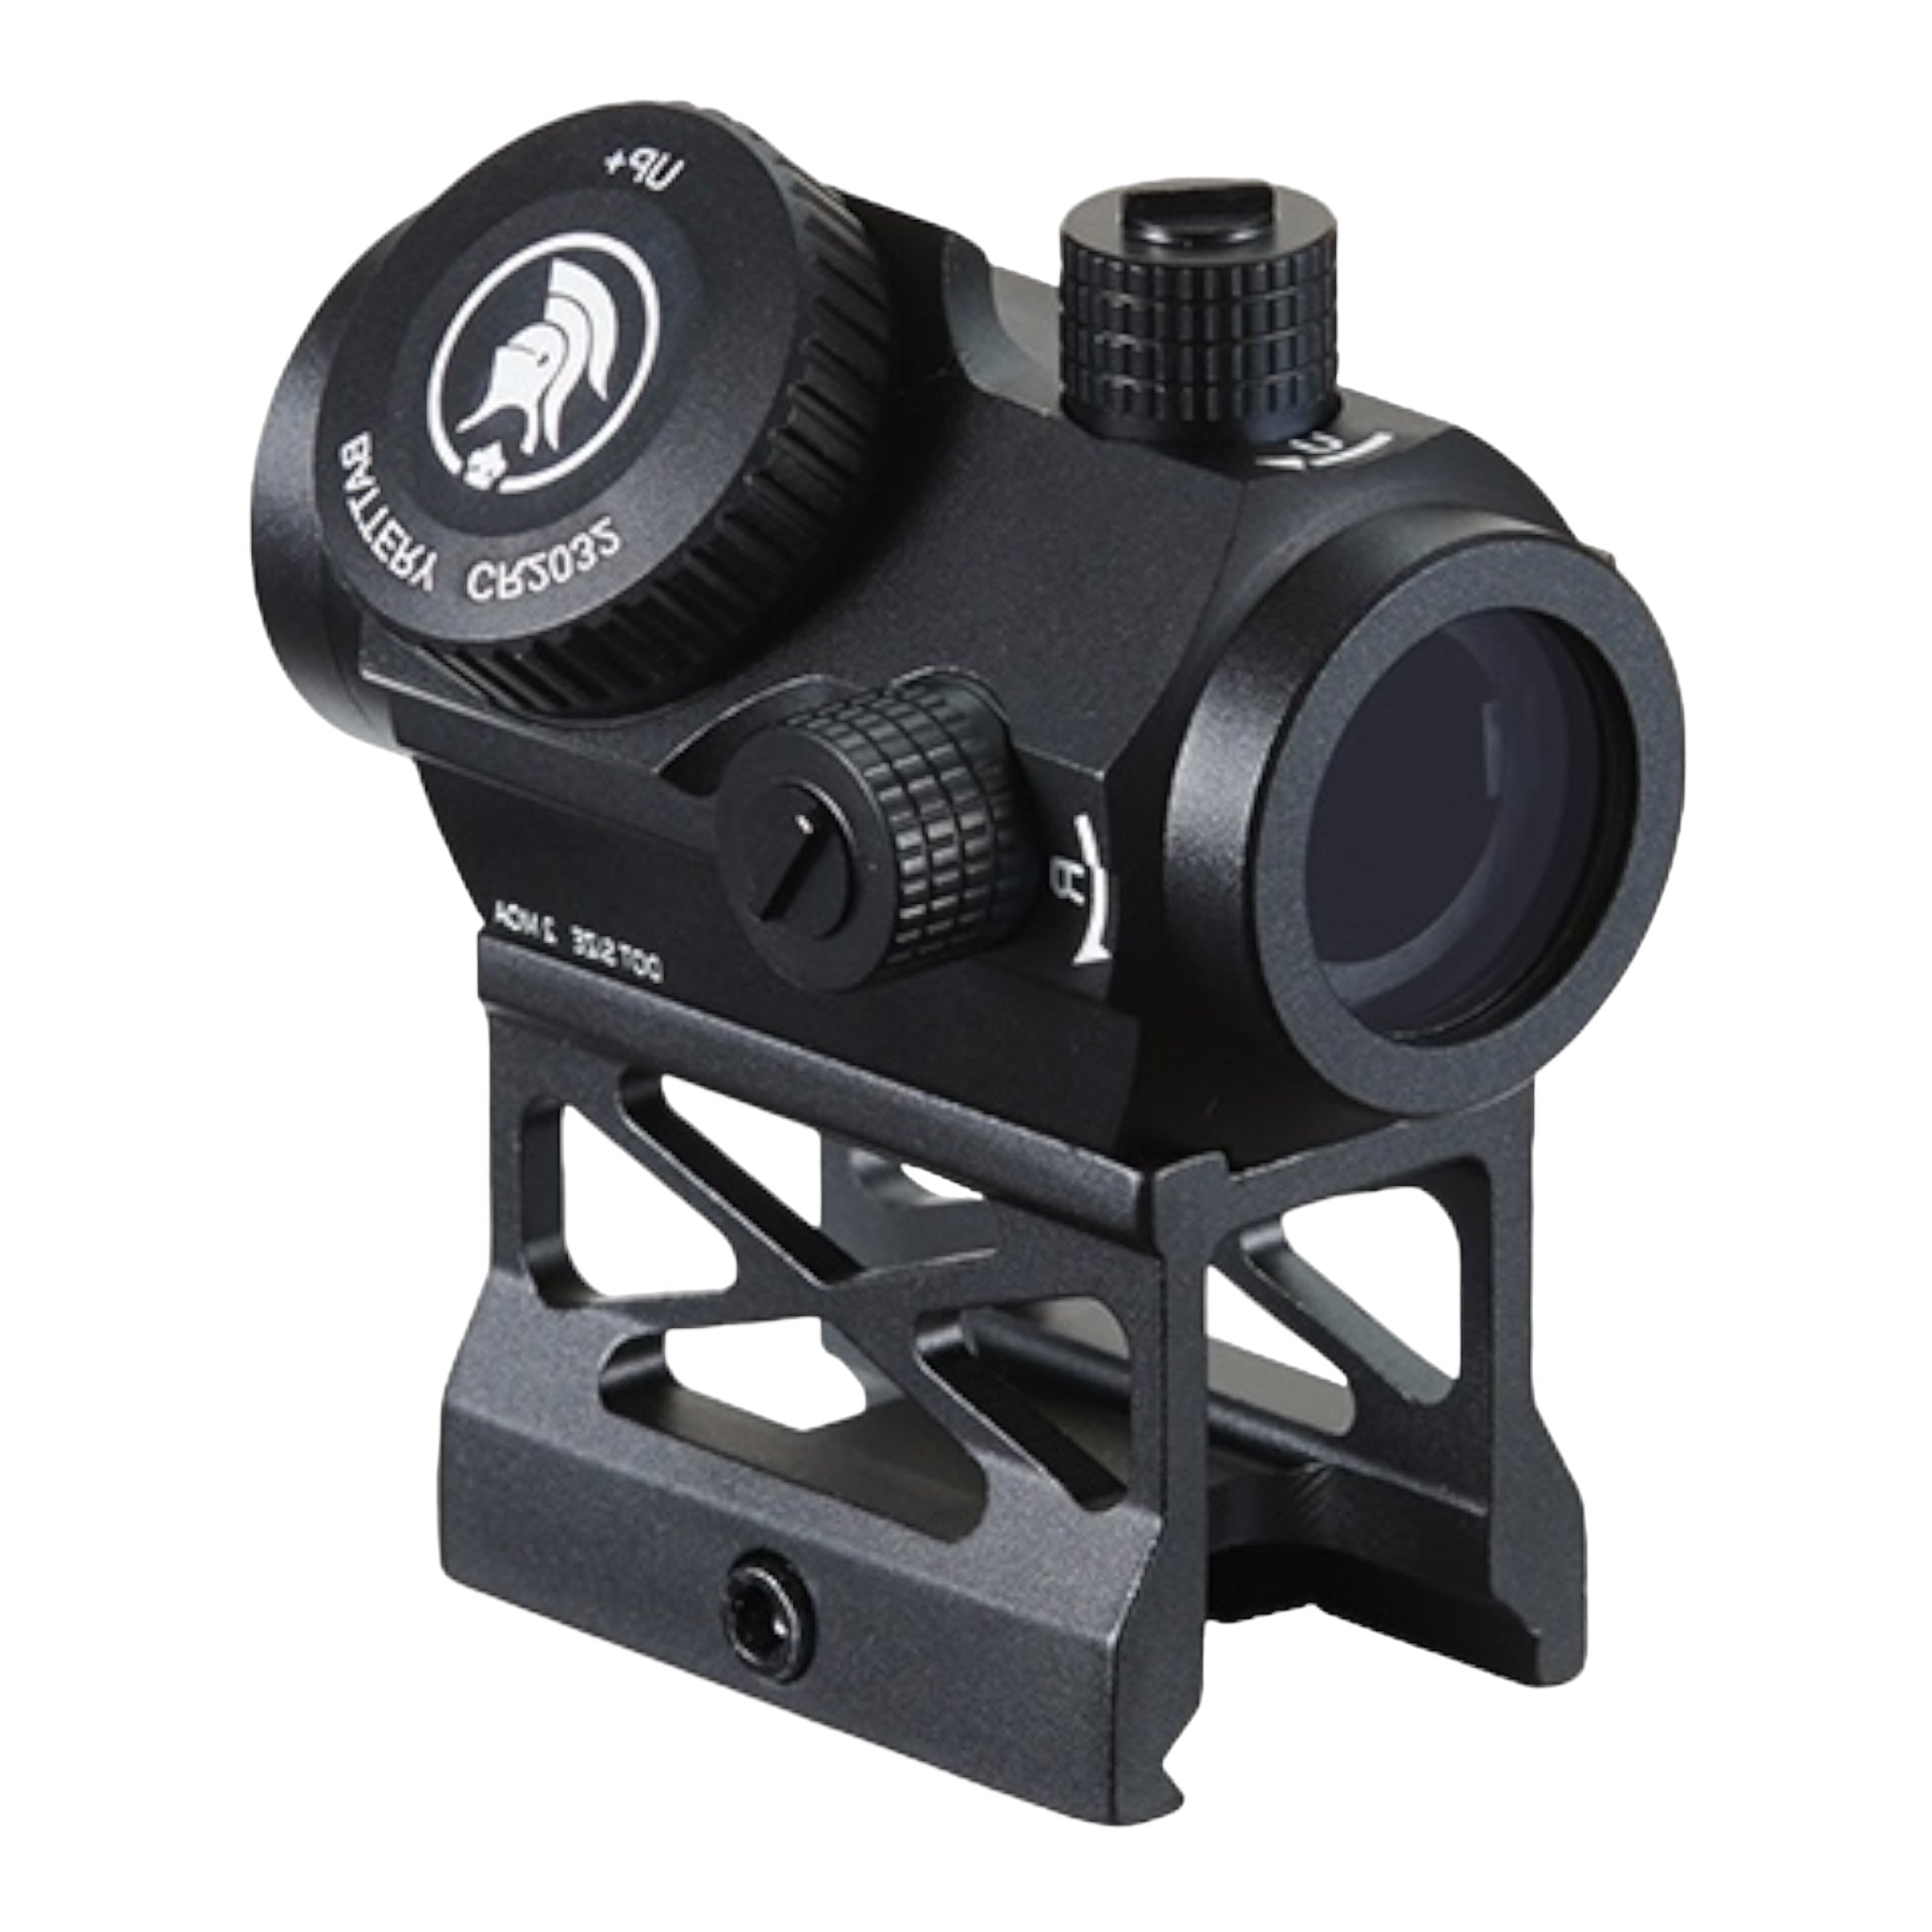 Lancer Tactical Micro Red Dot Sight with Riser Mount - ssairsoft.com